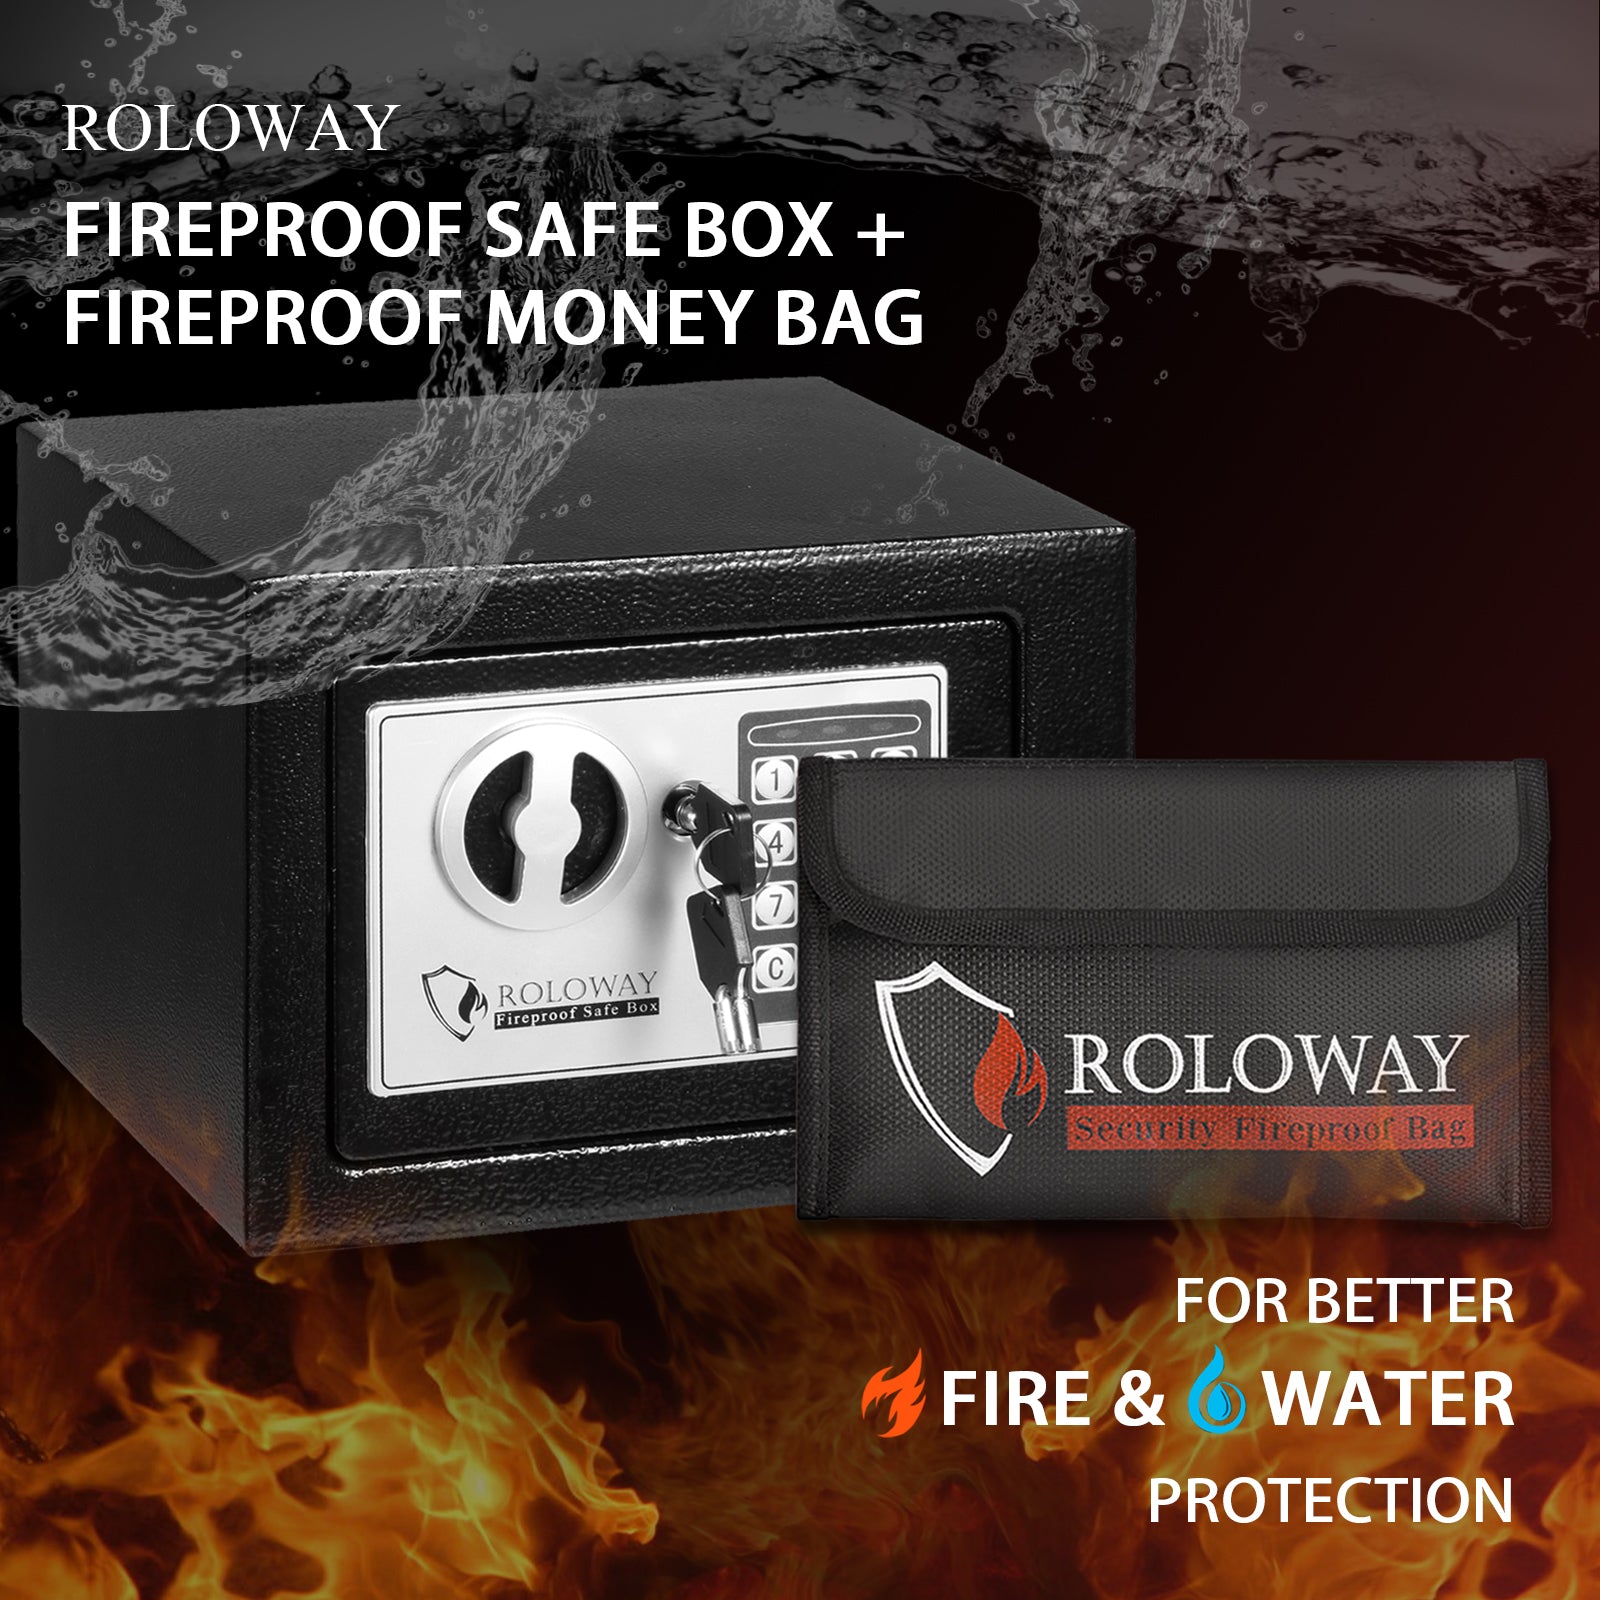 Bundle-ROLOWAY SAFE Steel Small Money Safe Box with Fireproof Money Bag for Cash and Fireproof Money Bags (2-Pack)